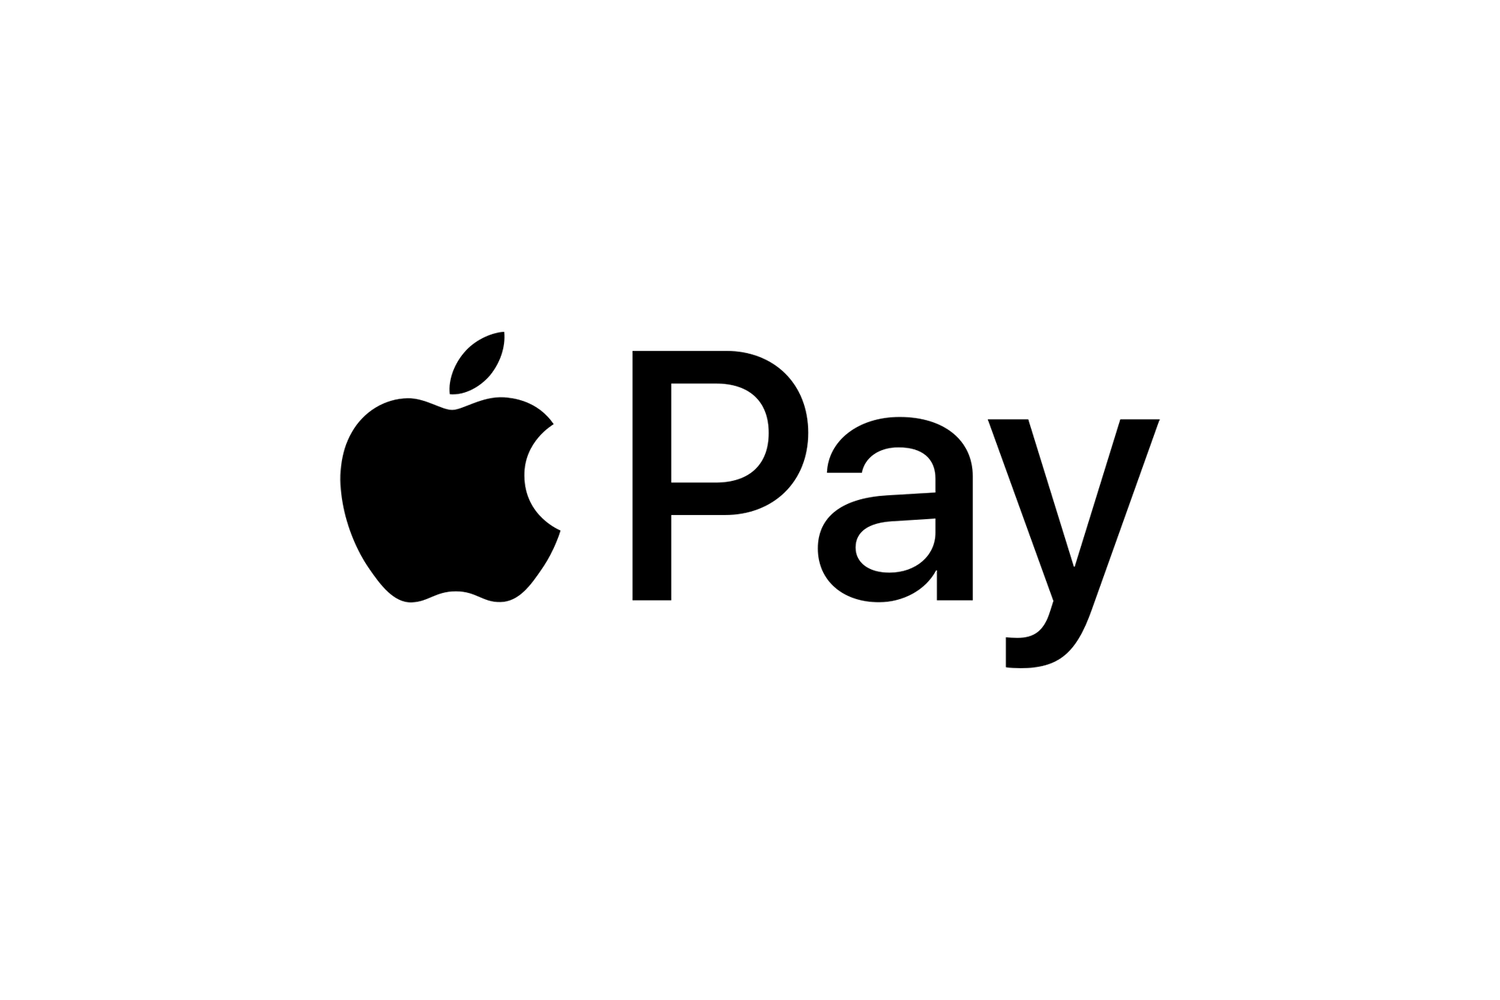 Zahlung per Apple Pay